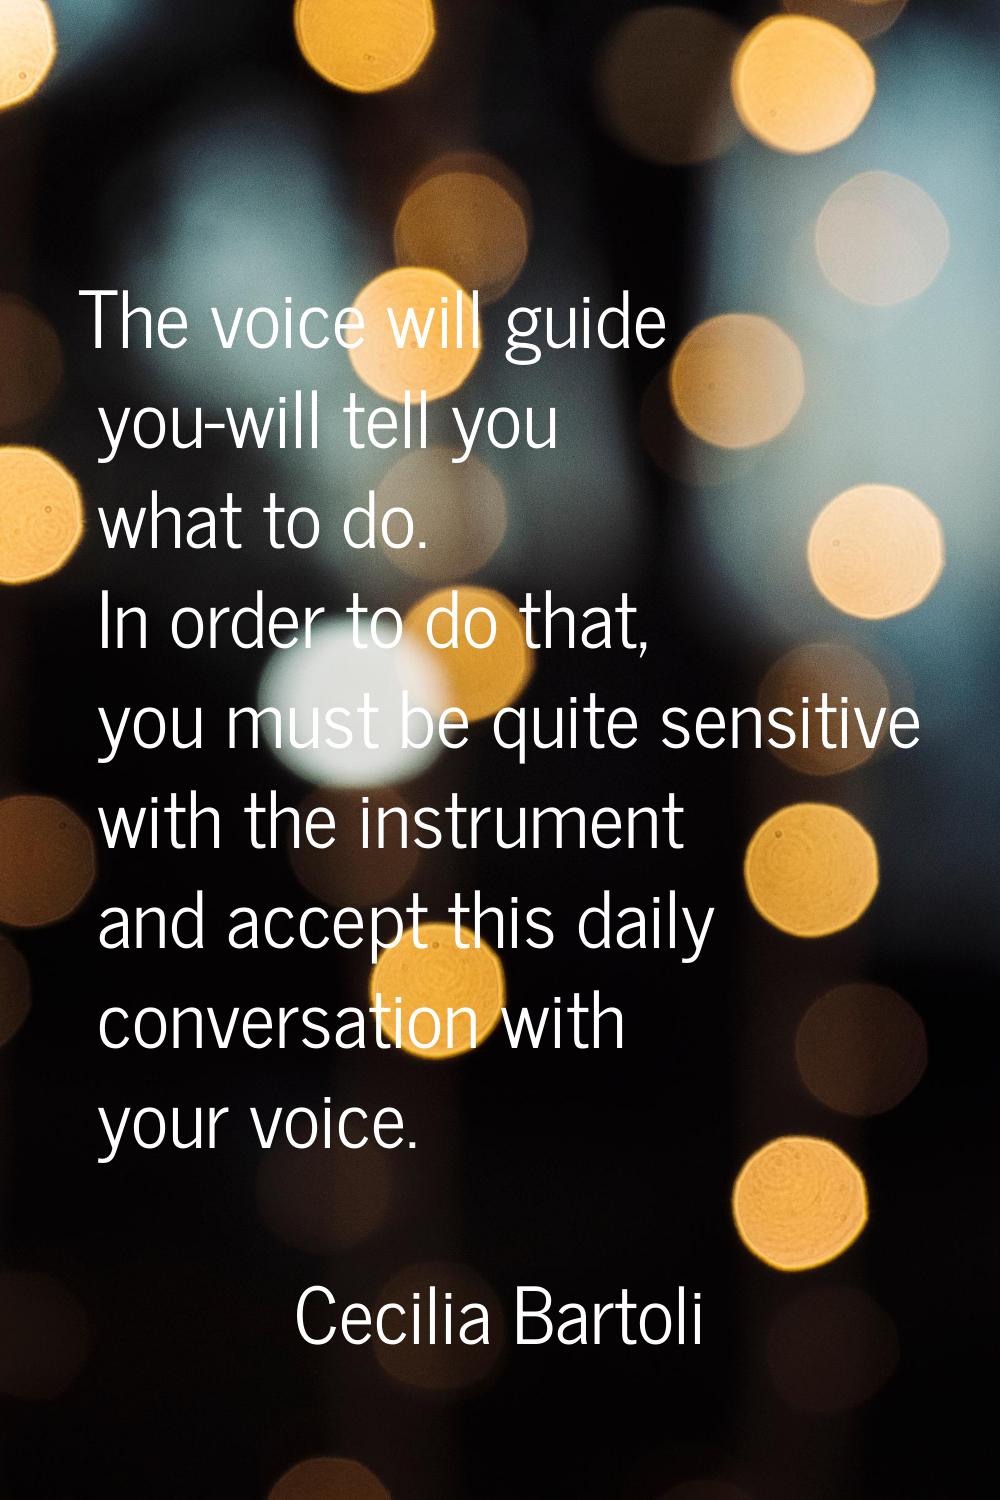 The voice will guide you-will tell you what to do. In order to do that, you must be quite sensitive